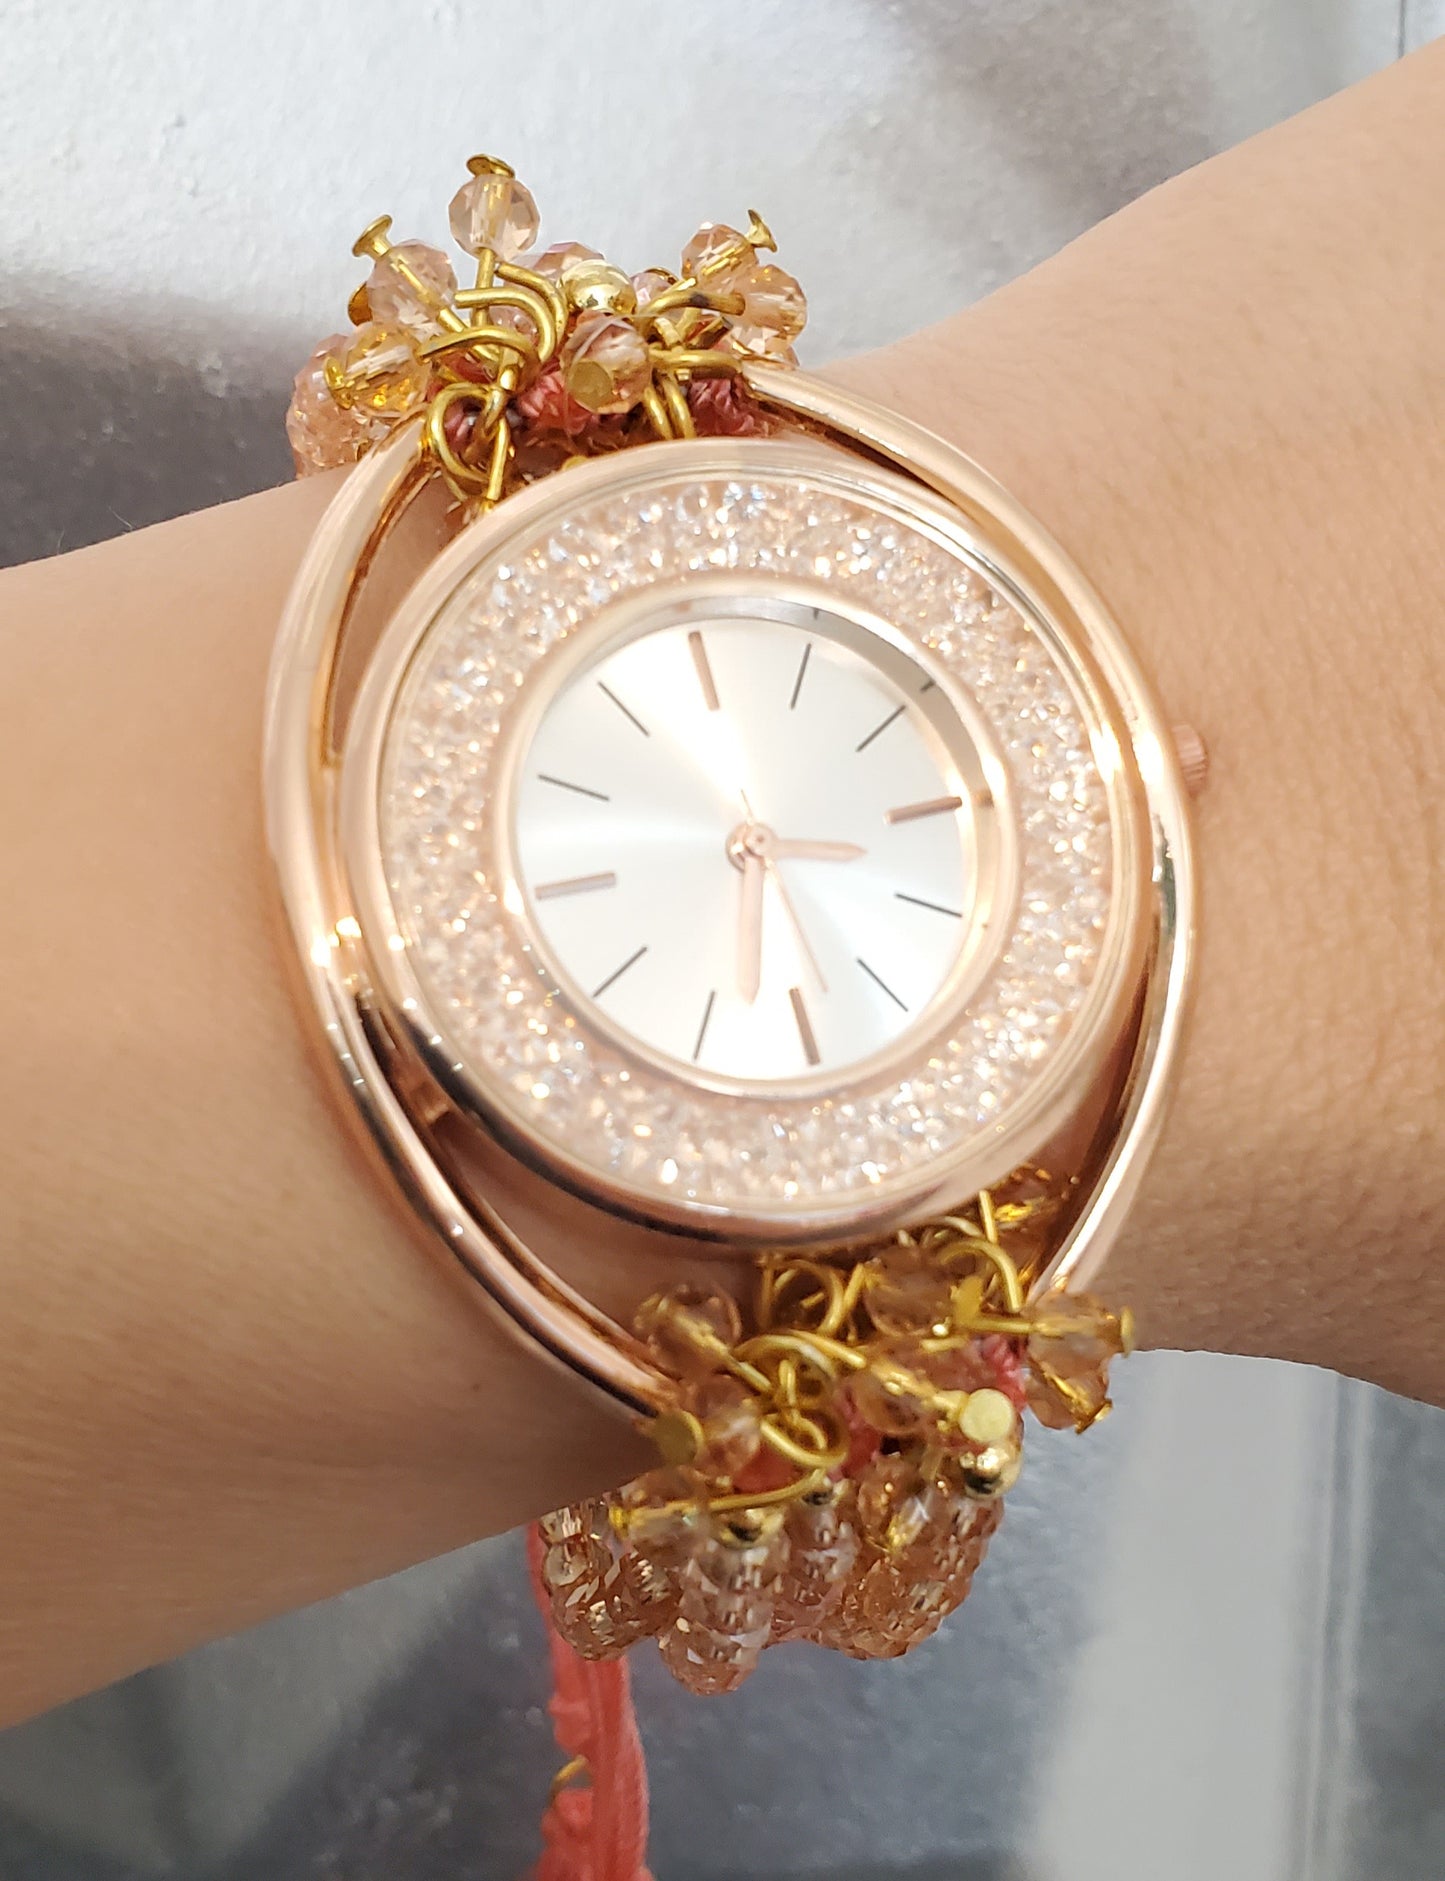 Cristal Checo Watches